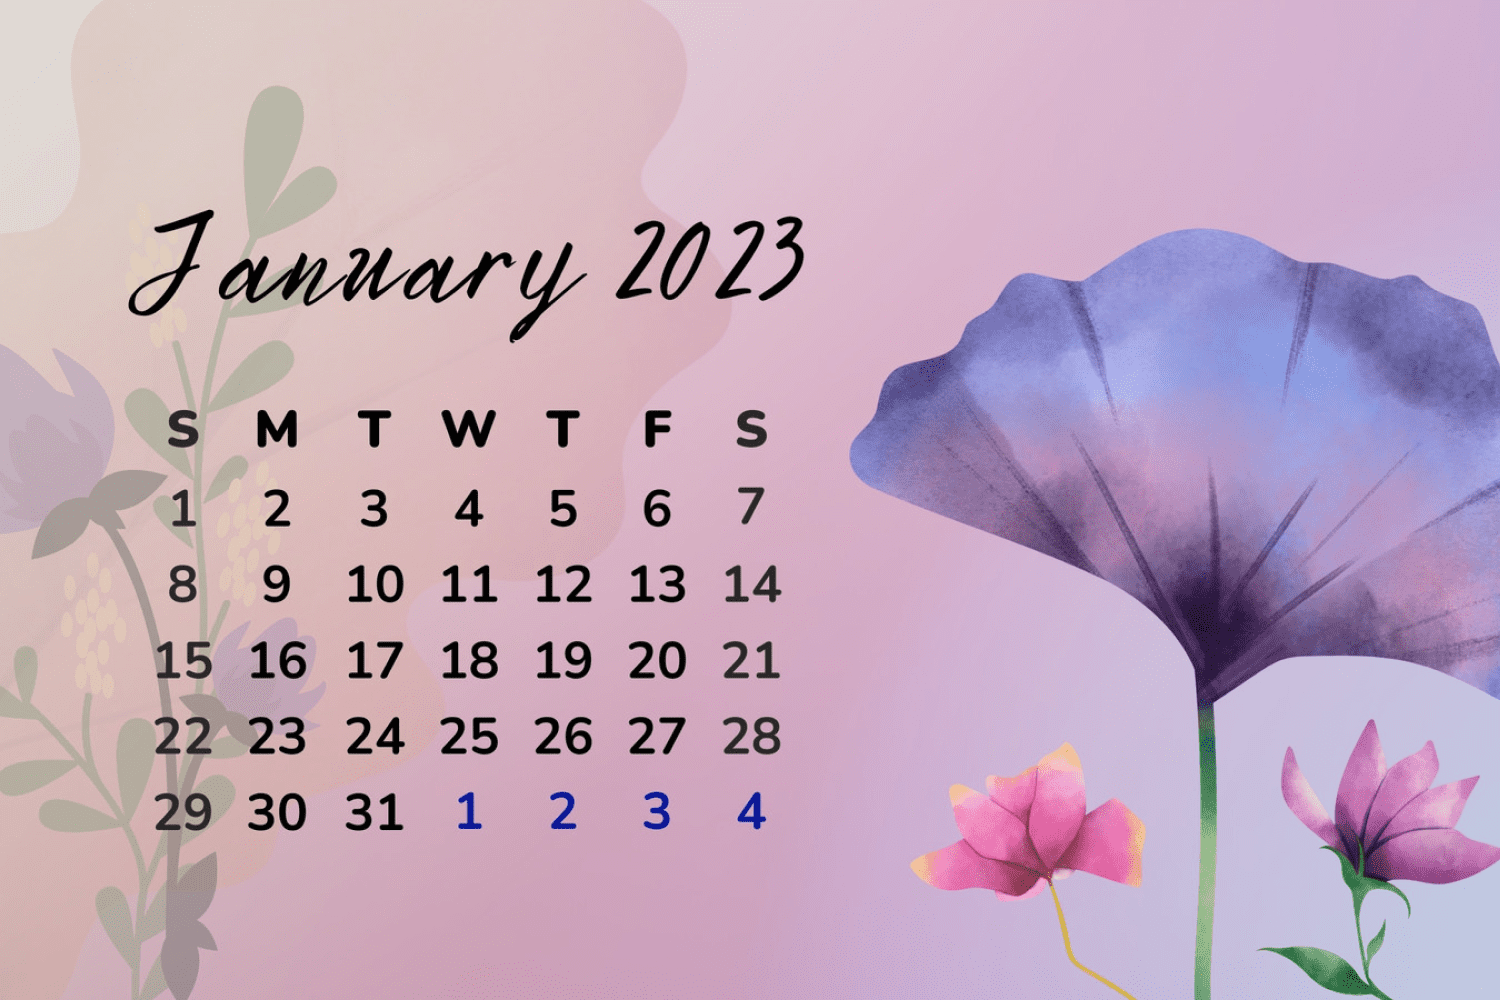 Calendar for January with a pink and purple color palette.